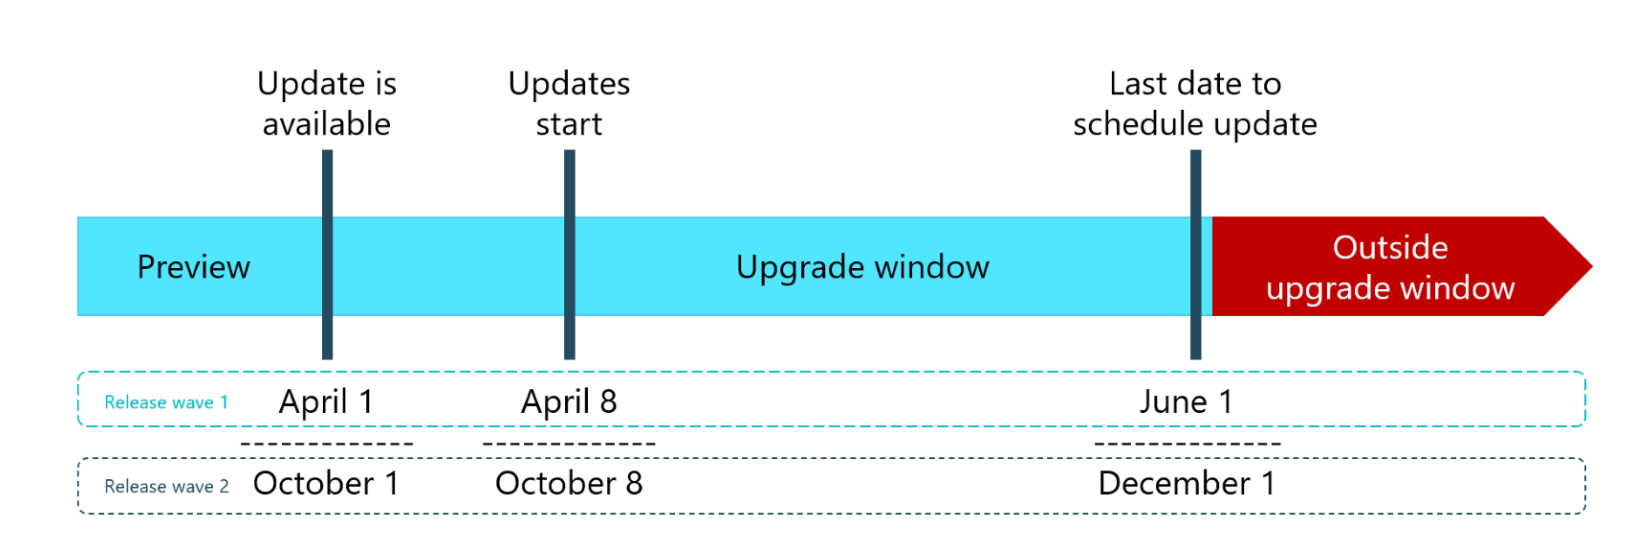 Business central upgrade process